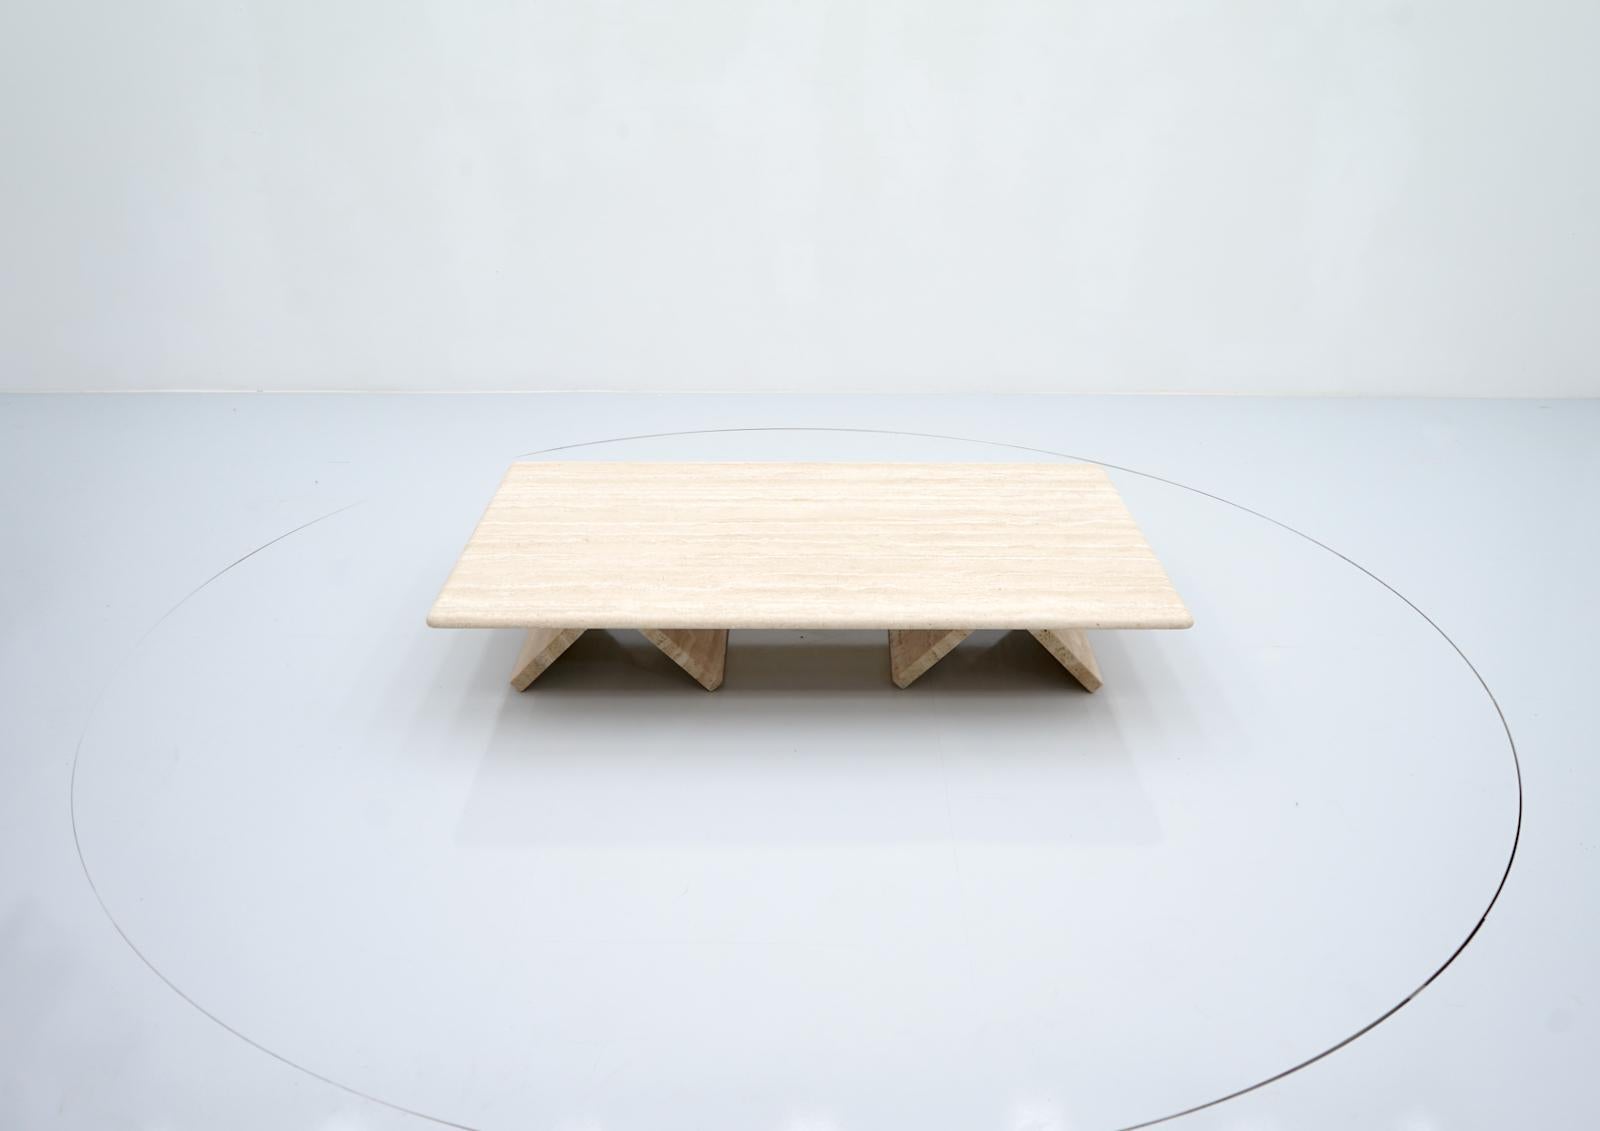 Rectangular coffee table in Italian travertine, 1970s. The table can be placed deep or high. 
Very good condition.

Details:

Creator: unknown
Period: 1970s
Color: beige
Style: Mid-Century Modern
Place of Origin: Italy
Dimensions: wide